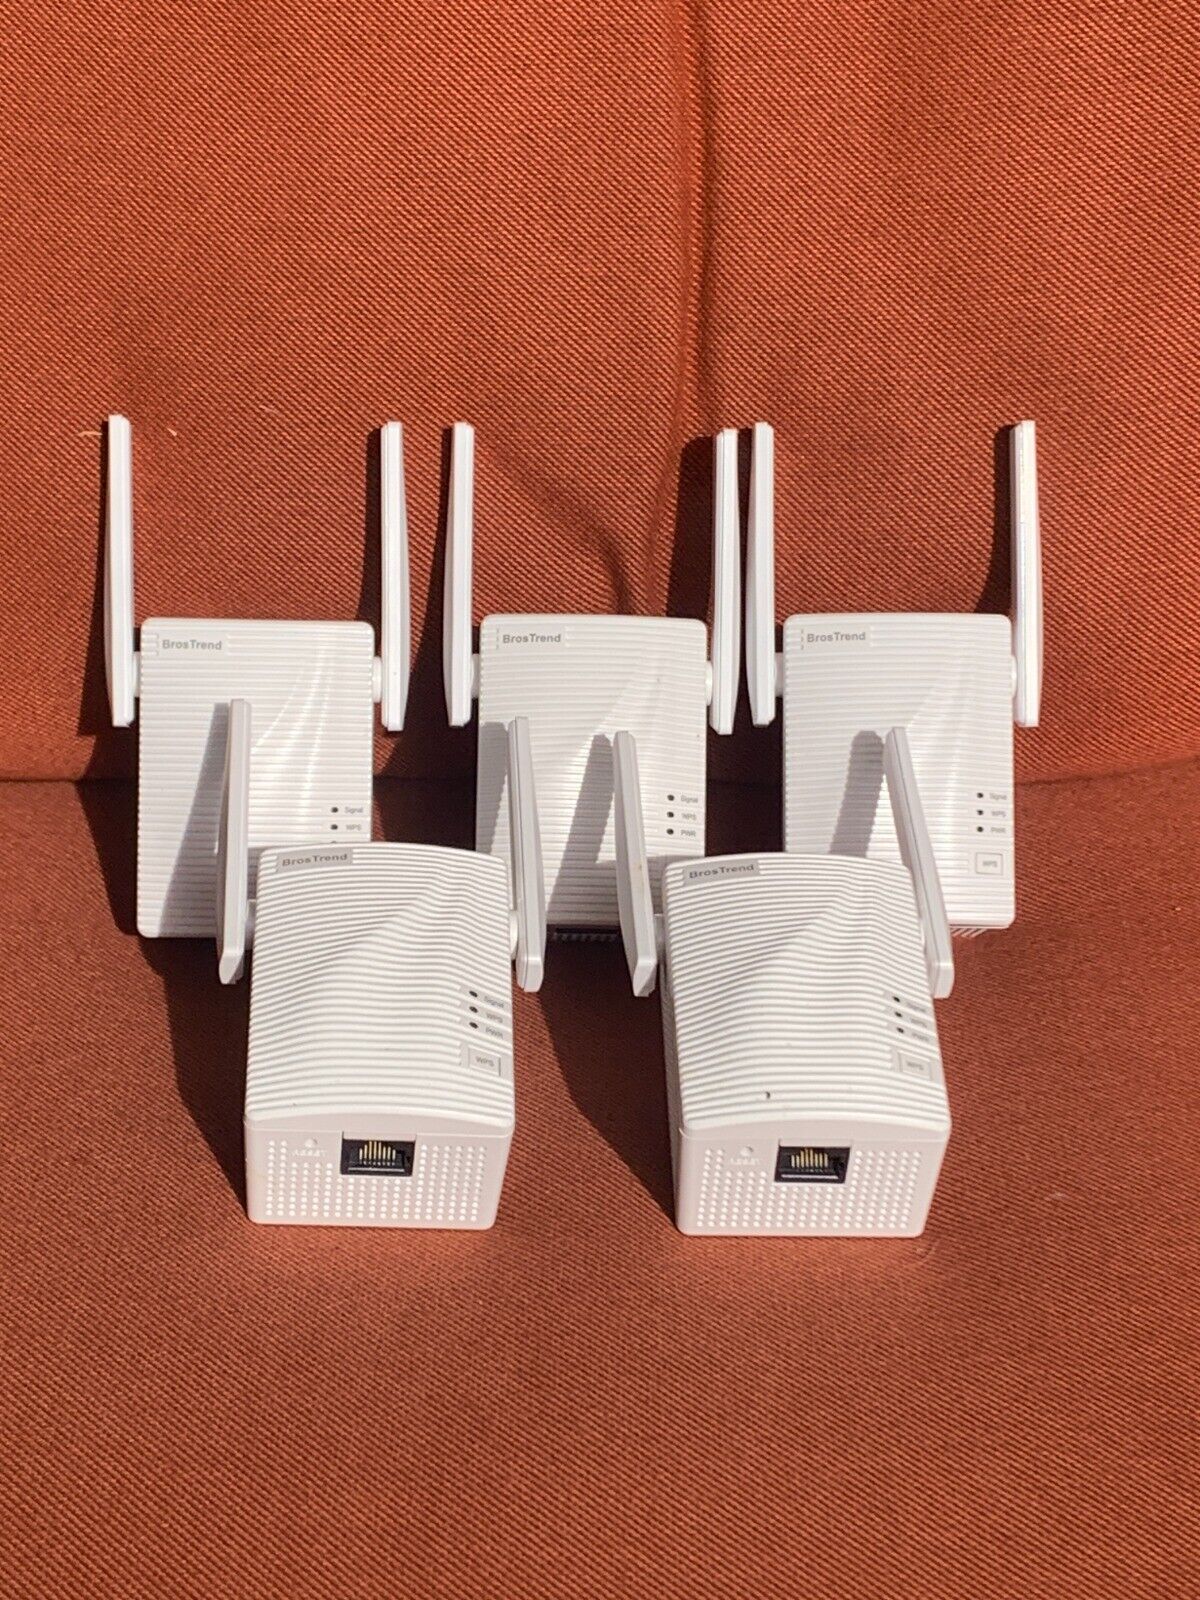 LOT OF 5 BROS TREND AC1200 Dual Band WiFi Extender Model E1 T31/ NEW/ NO BOXES